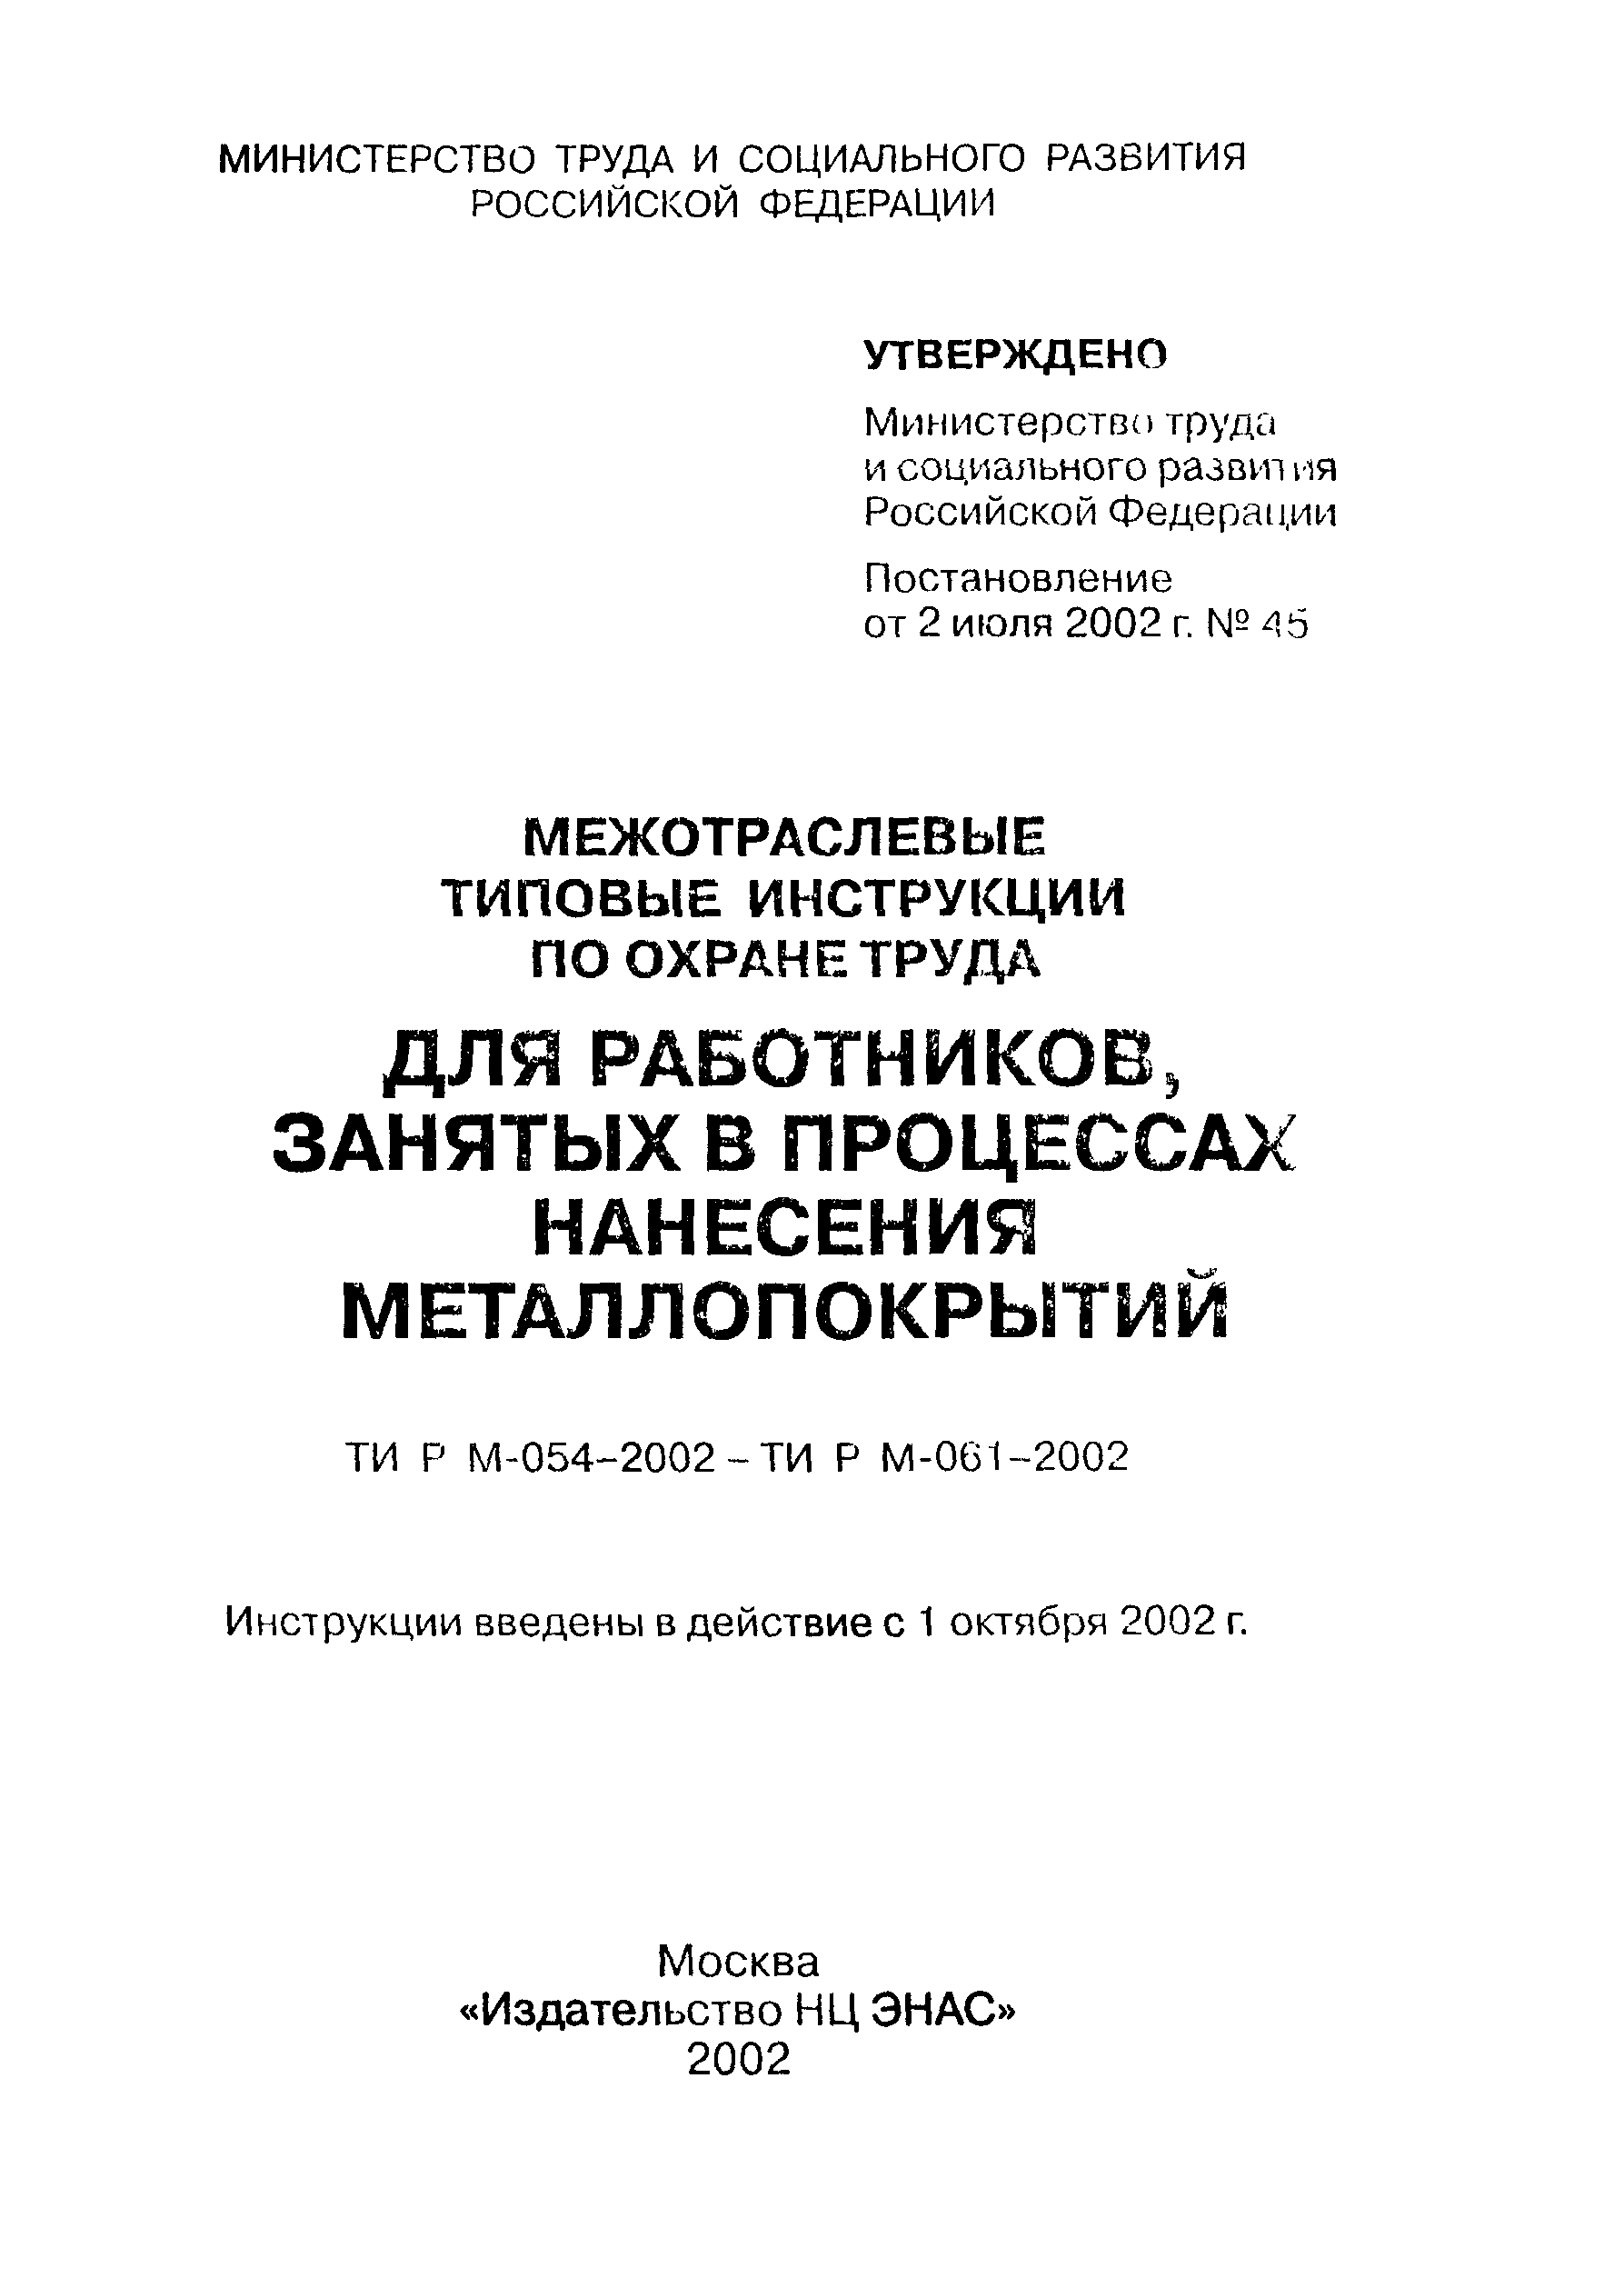 ТИ Р М-054-2002